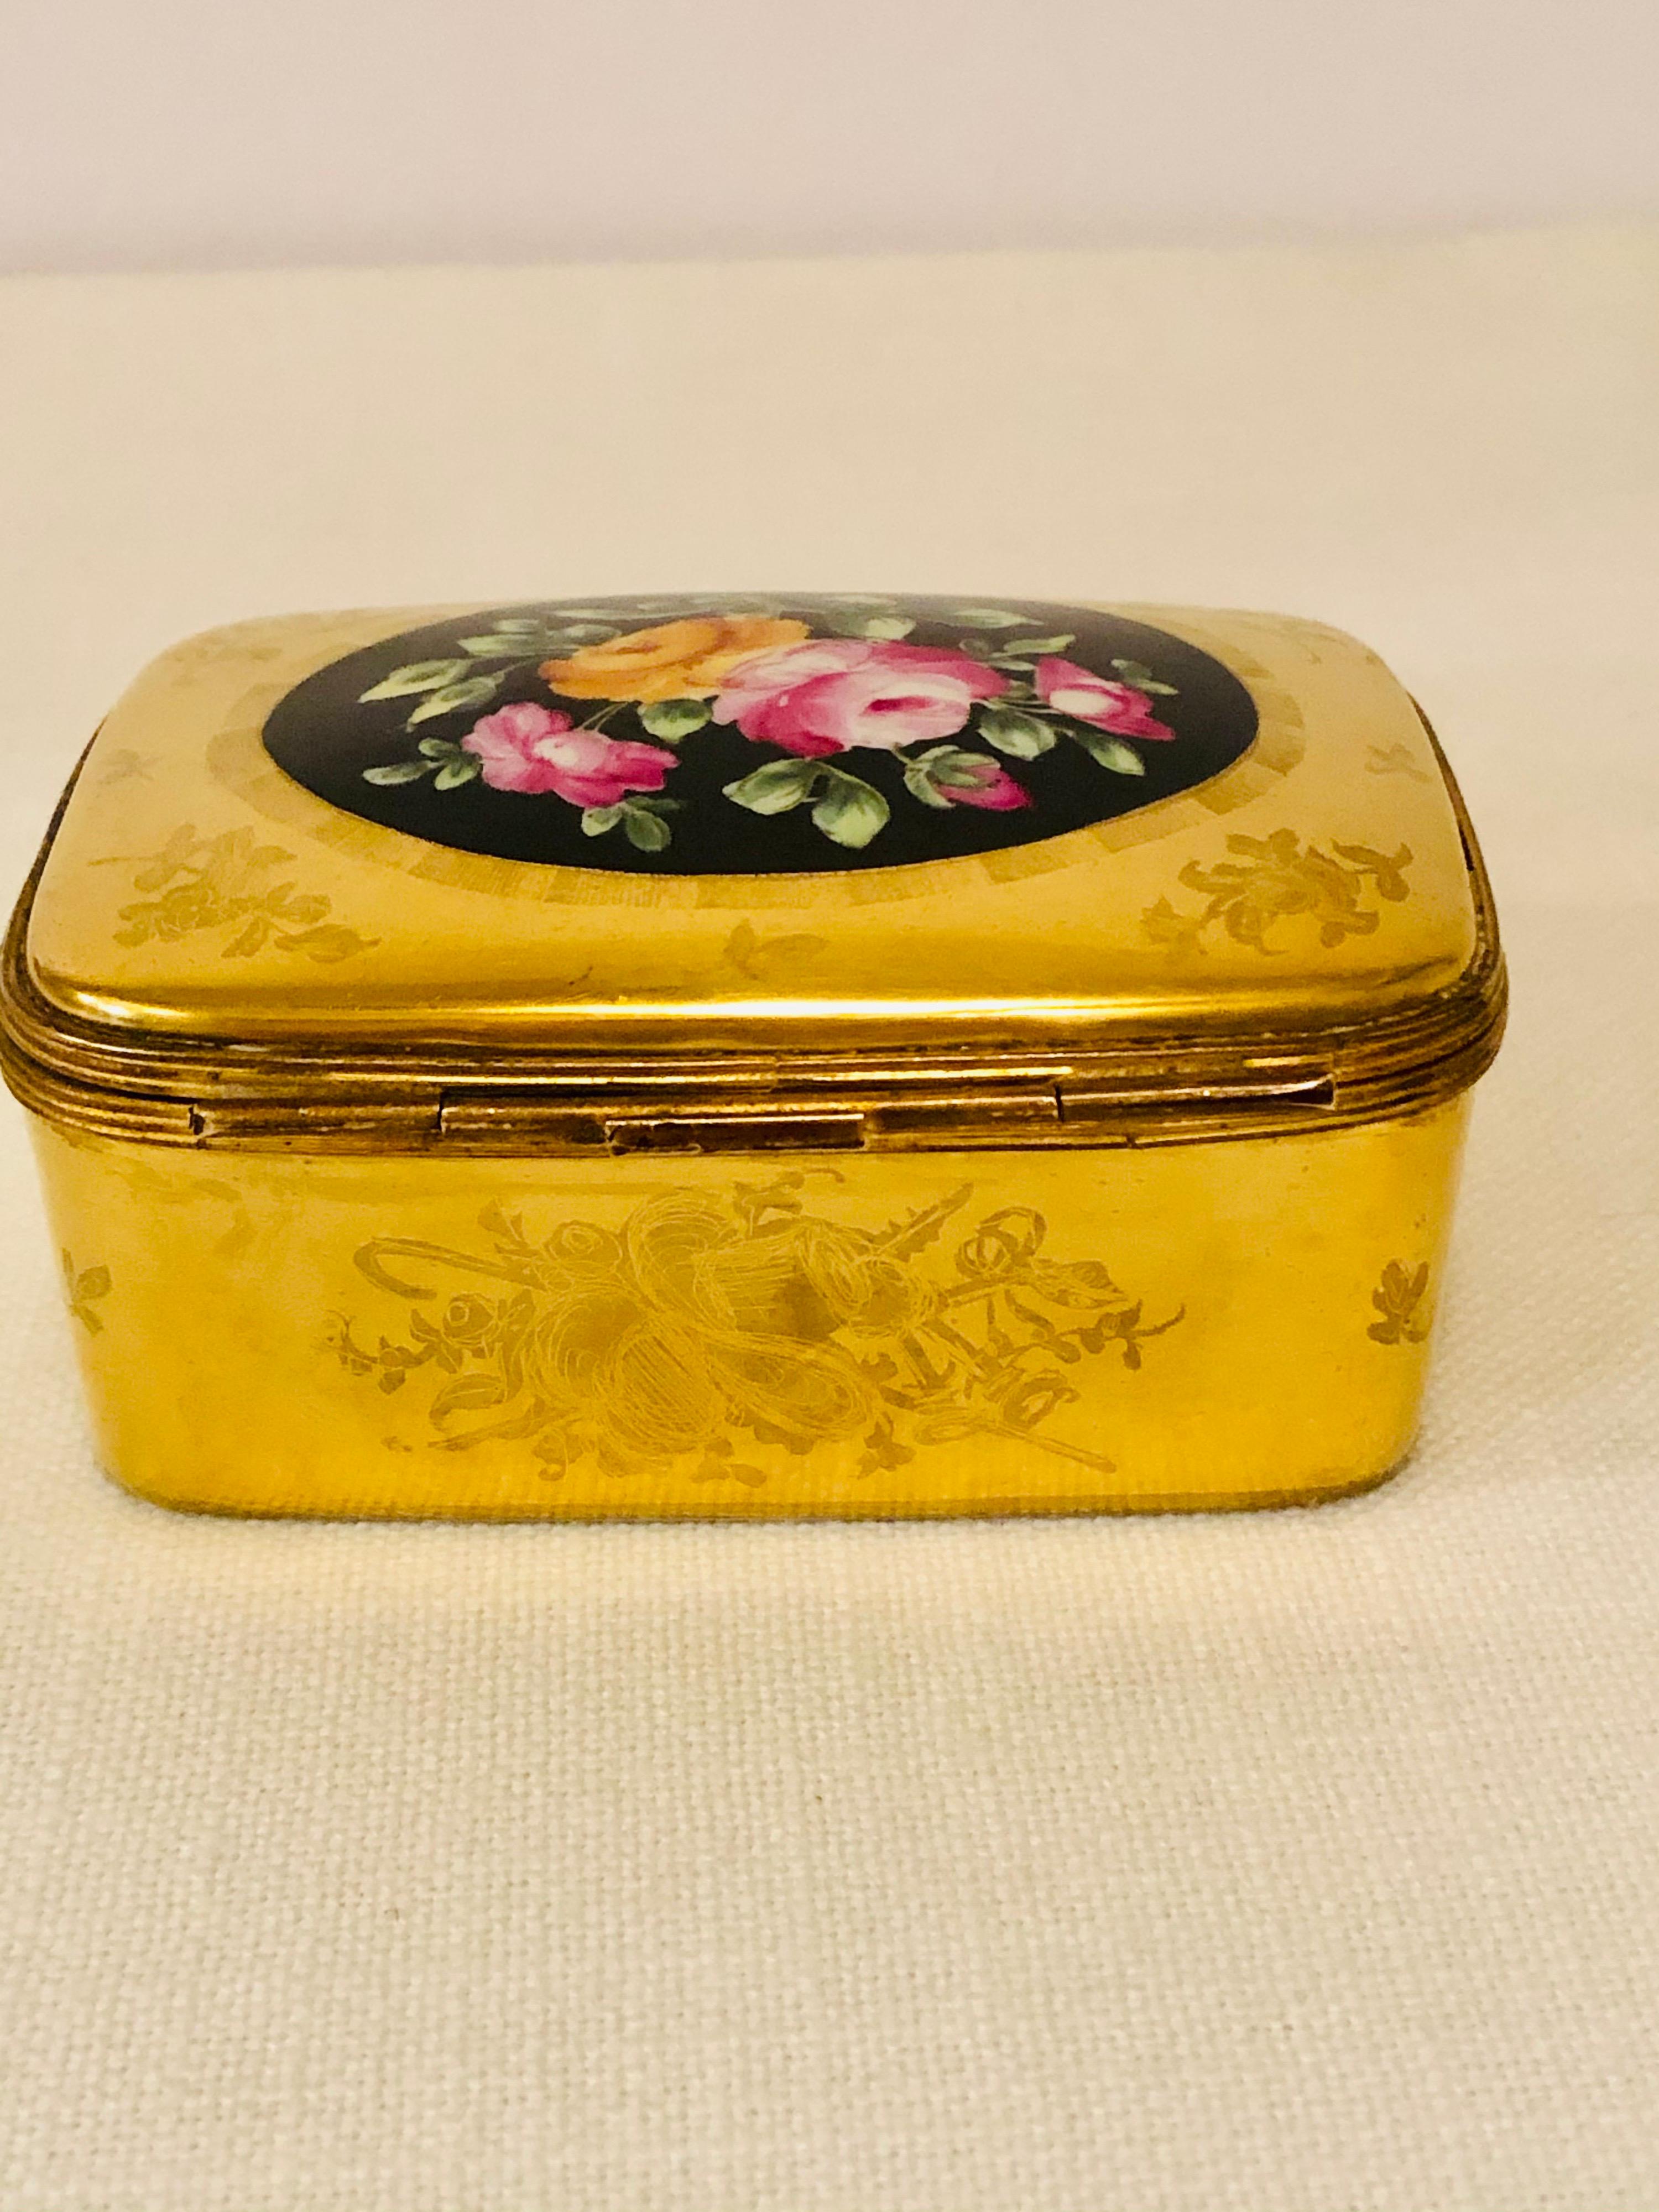 Le Tallec Box with a Gold BackGround and a Central Painting of a Flower Bouquet 4